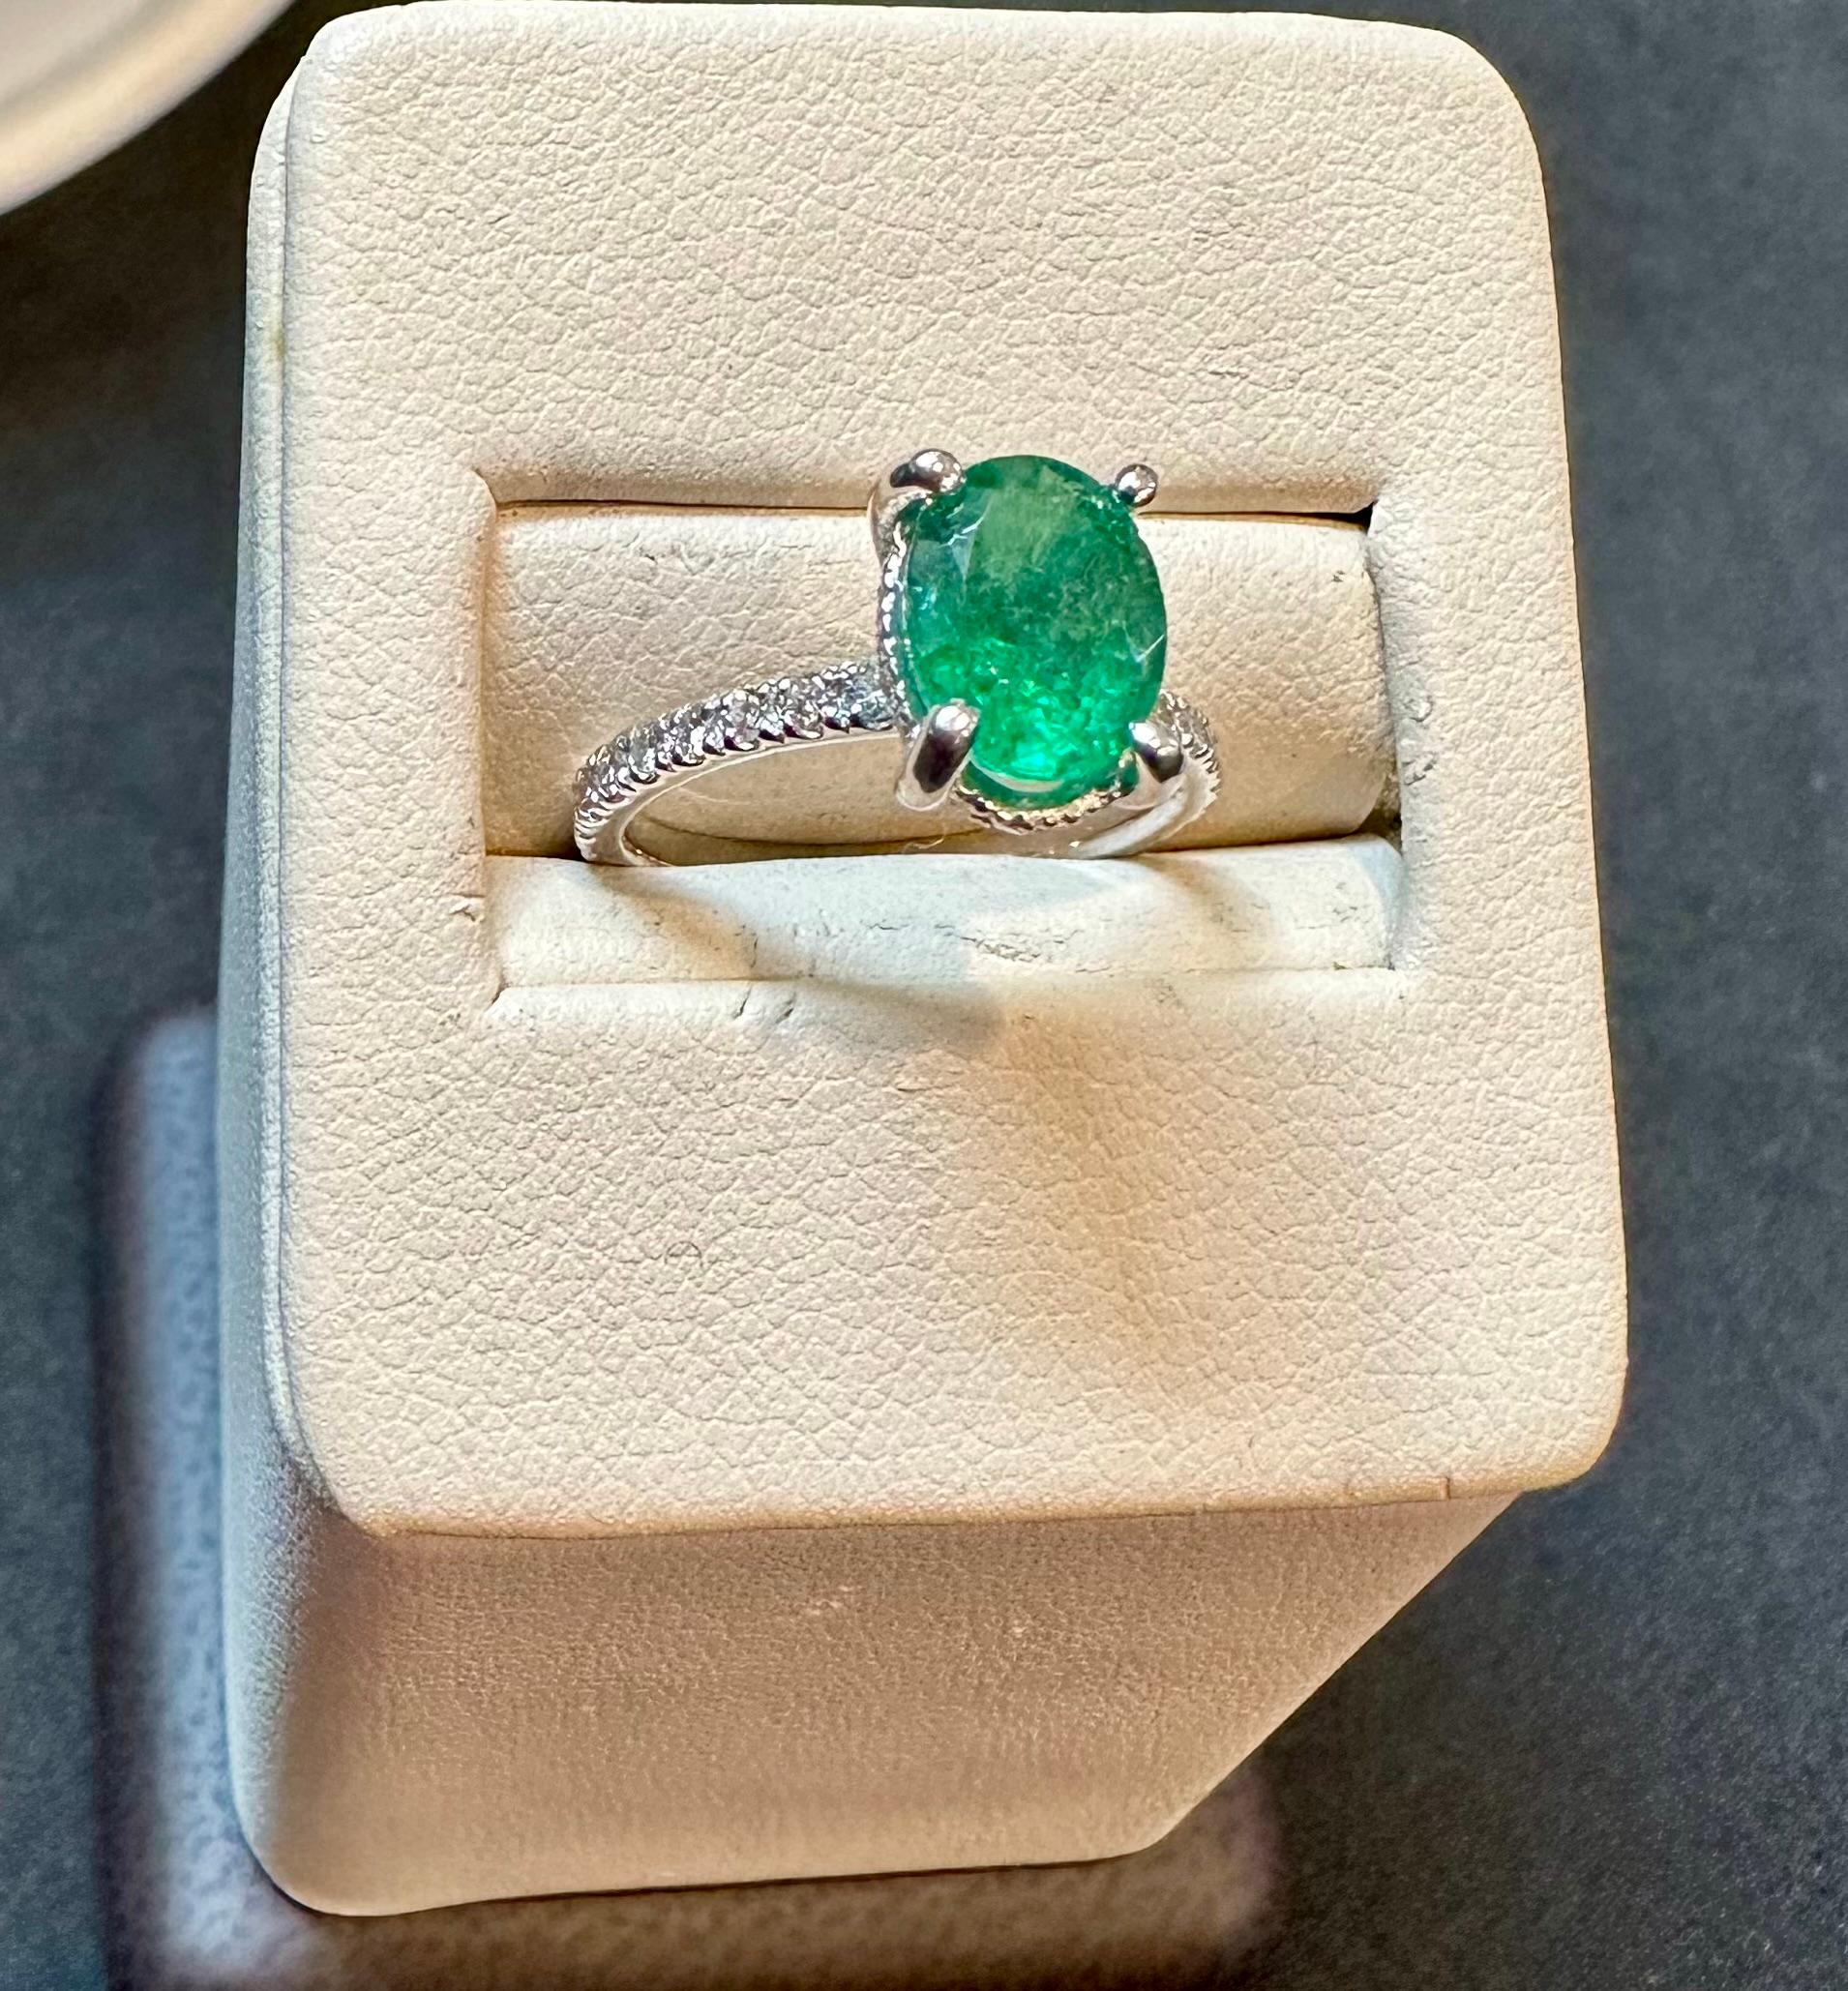 Natural 1.25 Ct Oval Cut Natural Emerald & 0.85 Ct Natural Pave Diamond Hidden Halo Engagement Ring with size 3.75 in 14 K white Gold
Introducing a truly stunning piece, behold the 1.25 Carat Oval Natural Zambian Emerald & 0.85ct Diamond Ring in